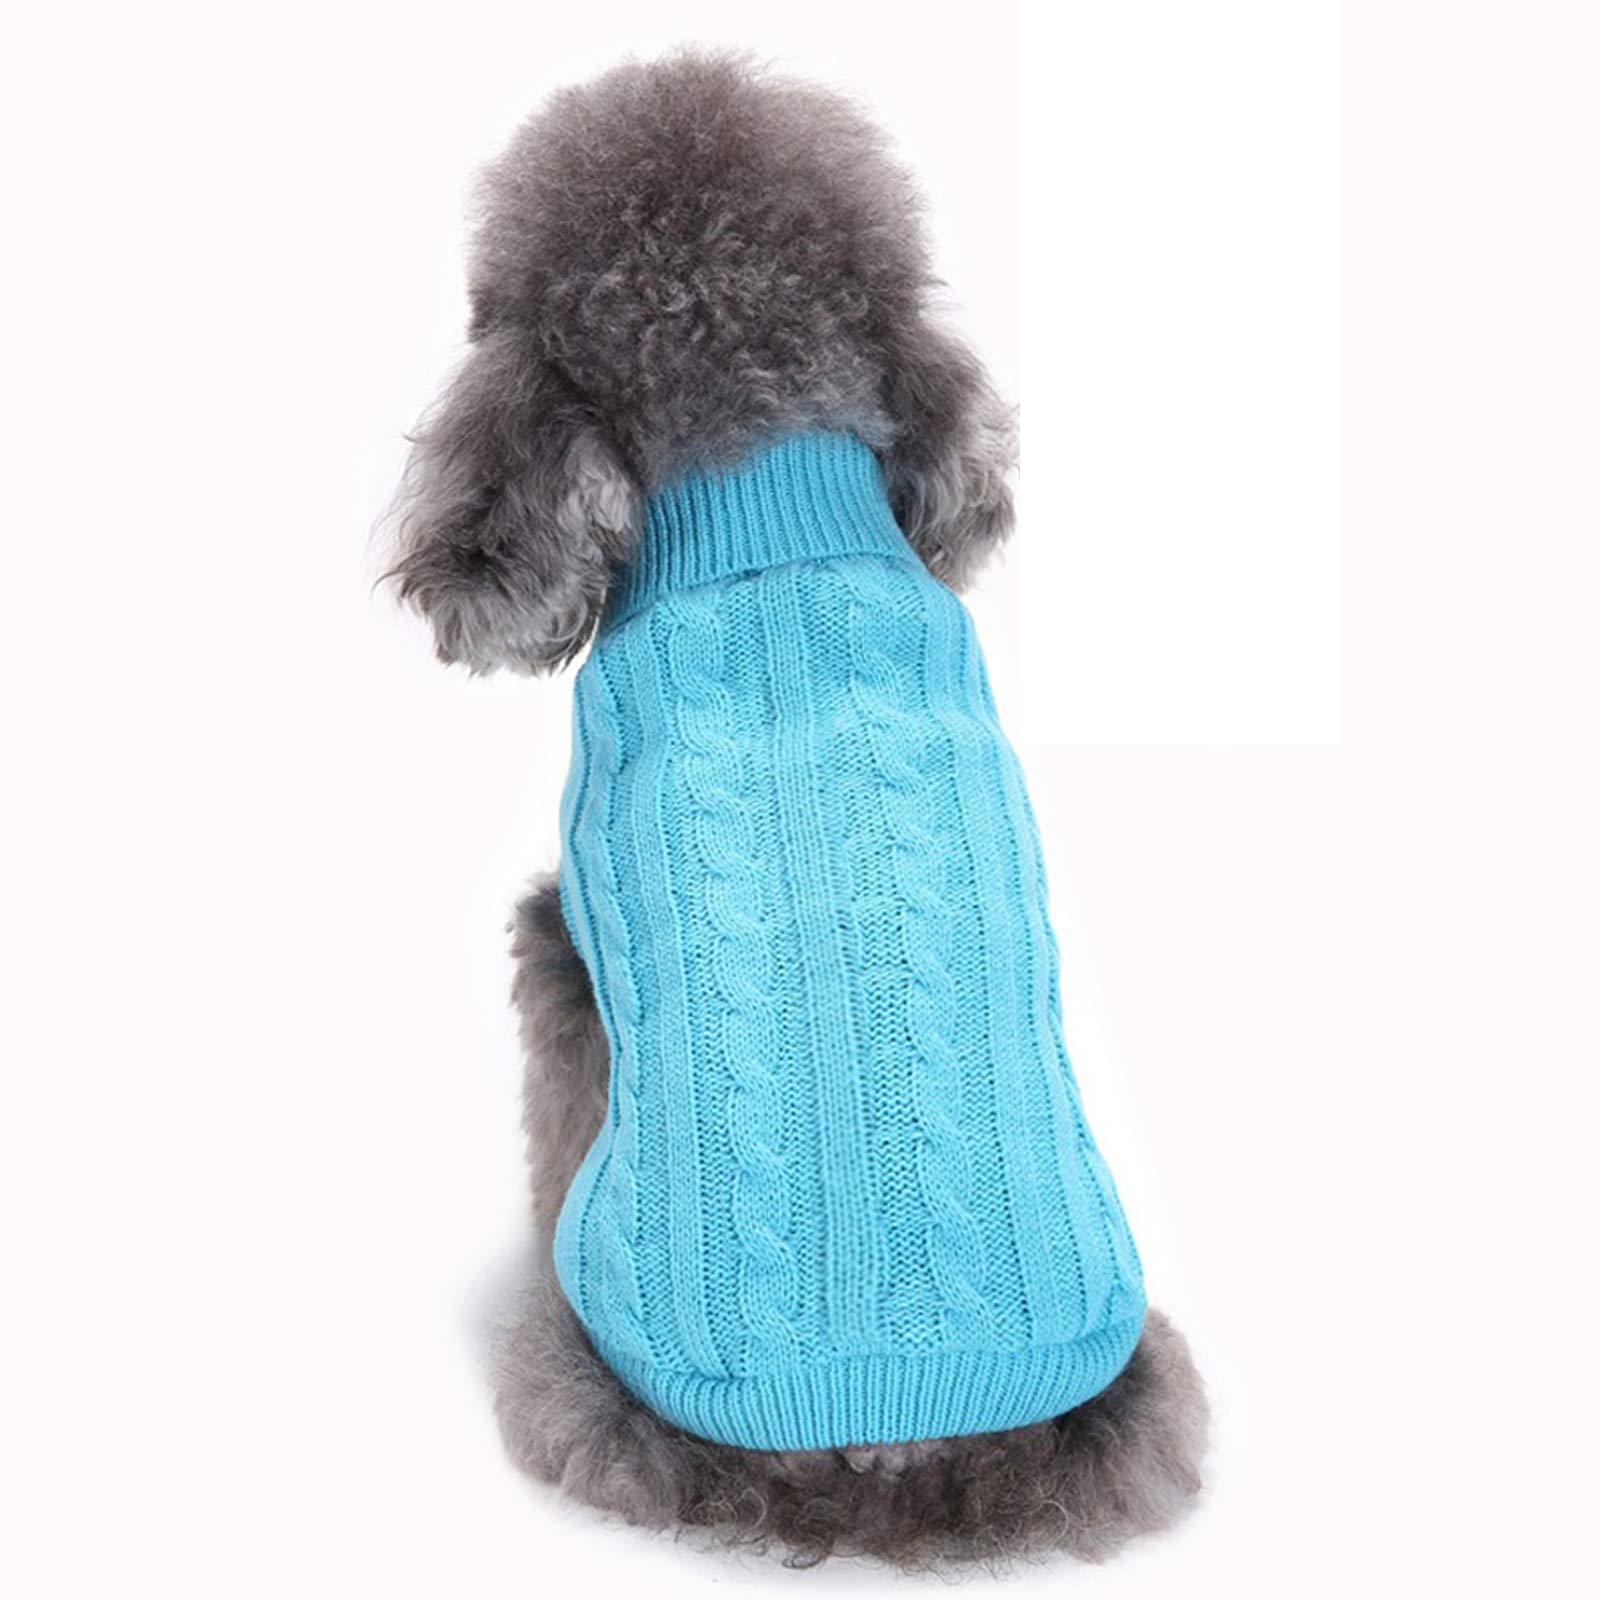 Bwealthest Dog Sweater, Warm Pet Sweater, Dog Sweaters for Small Dogs Medium Dogs Large Dogs, Cute Knitted Classic Cat Sweater Dog Clothes 